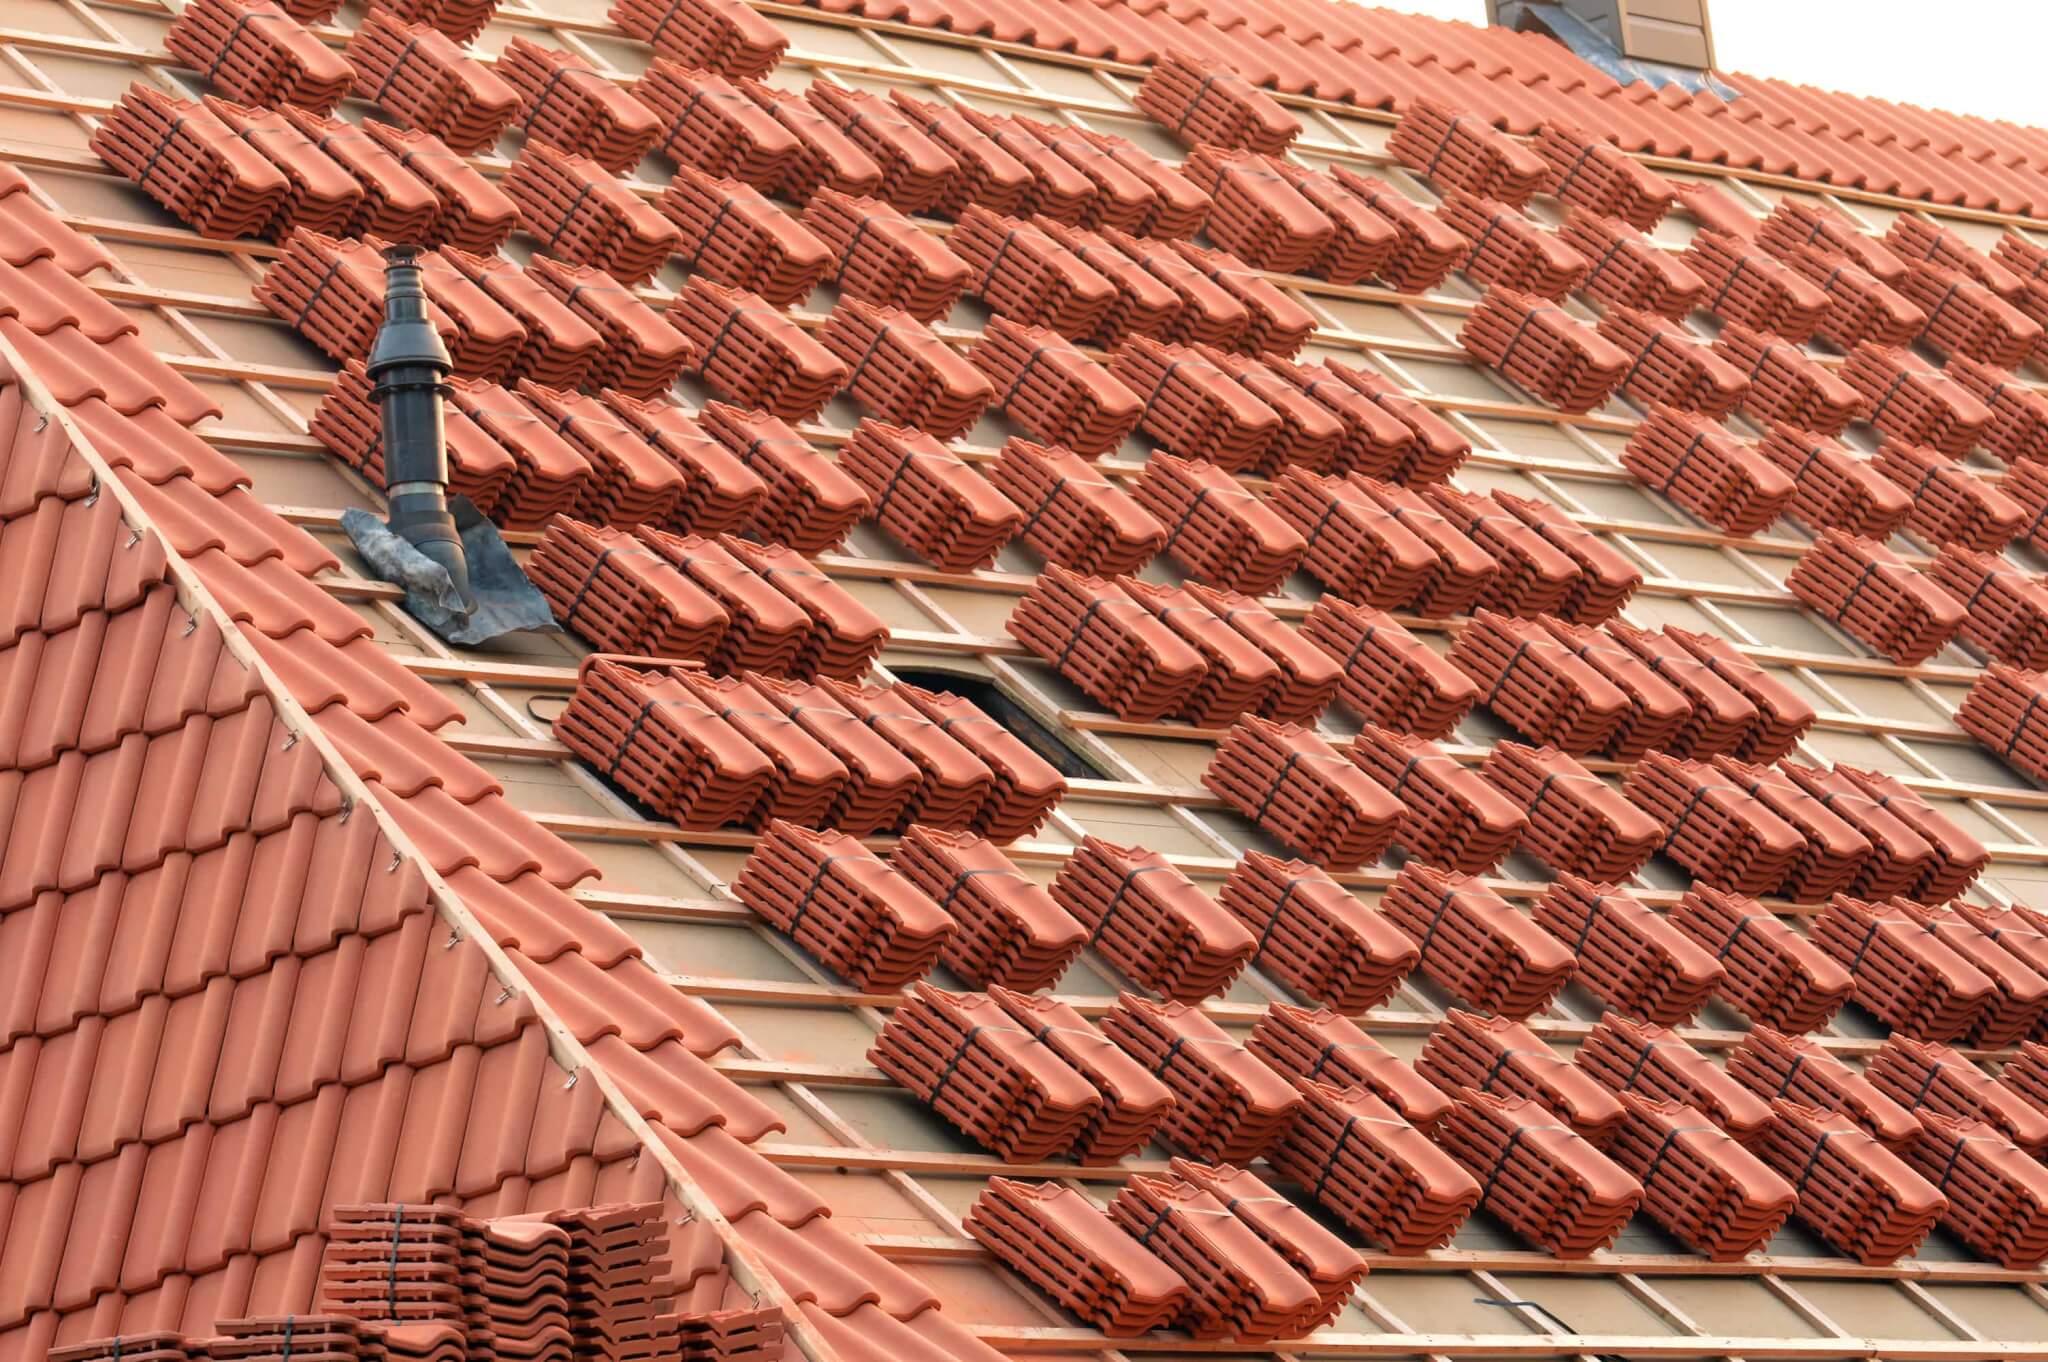 Finding The Right Orlando Roof Company For You